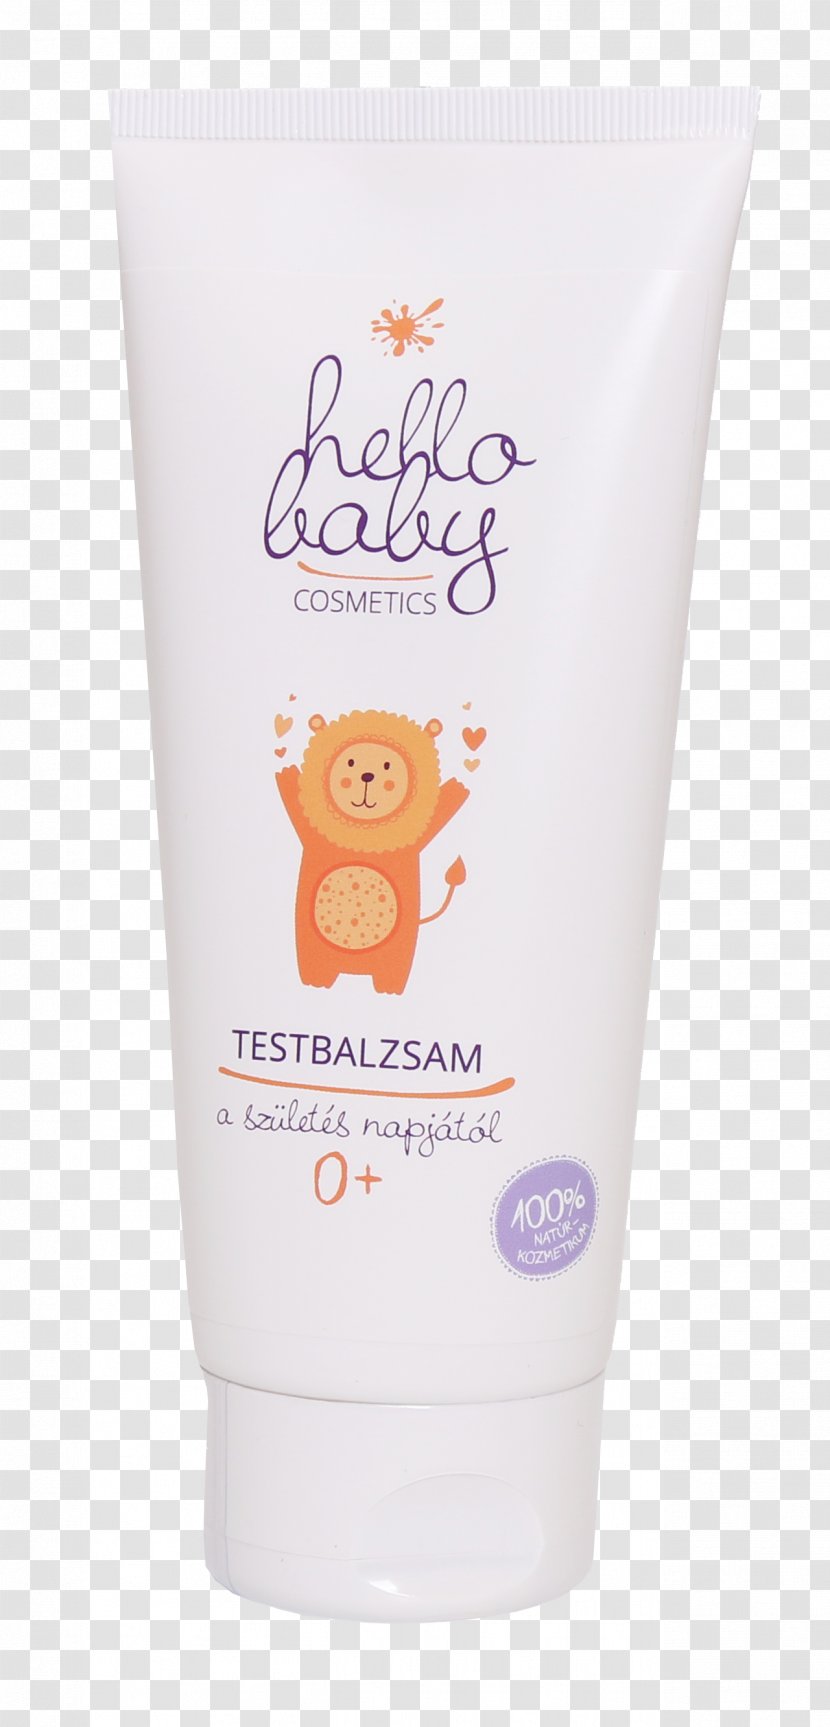 Cream Infant Lotion Mamas & Papas Sunscreen - Skin Care - Home Page Transparent PNG